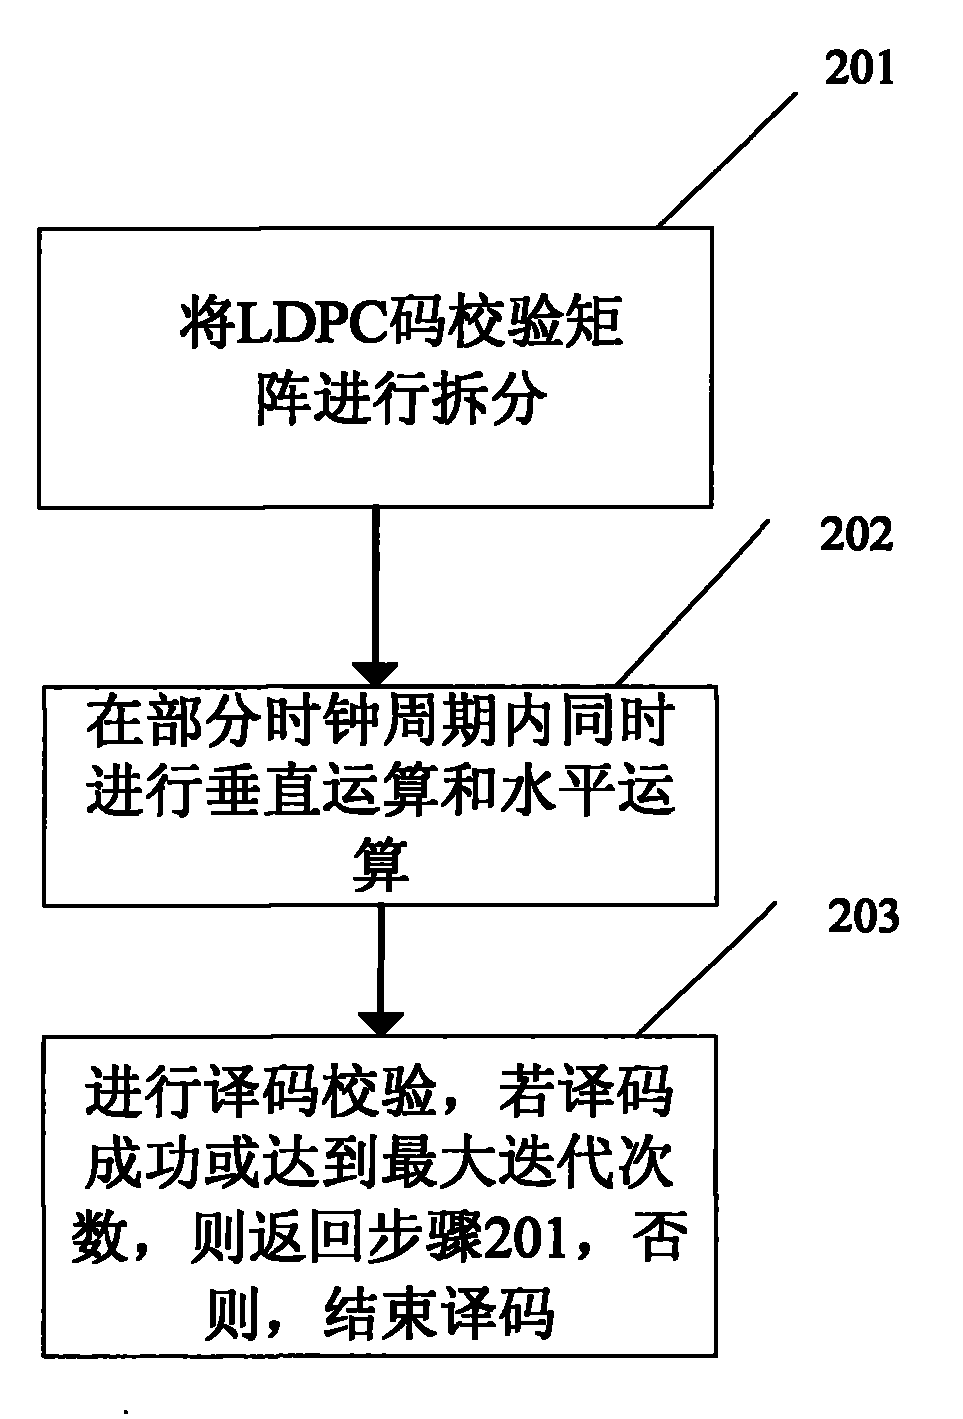 LDPC code decoding method for realizing simultaneous operation of horizontal operation and vertical operation